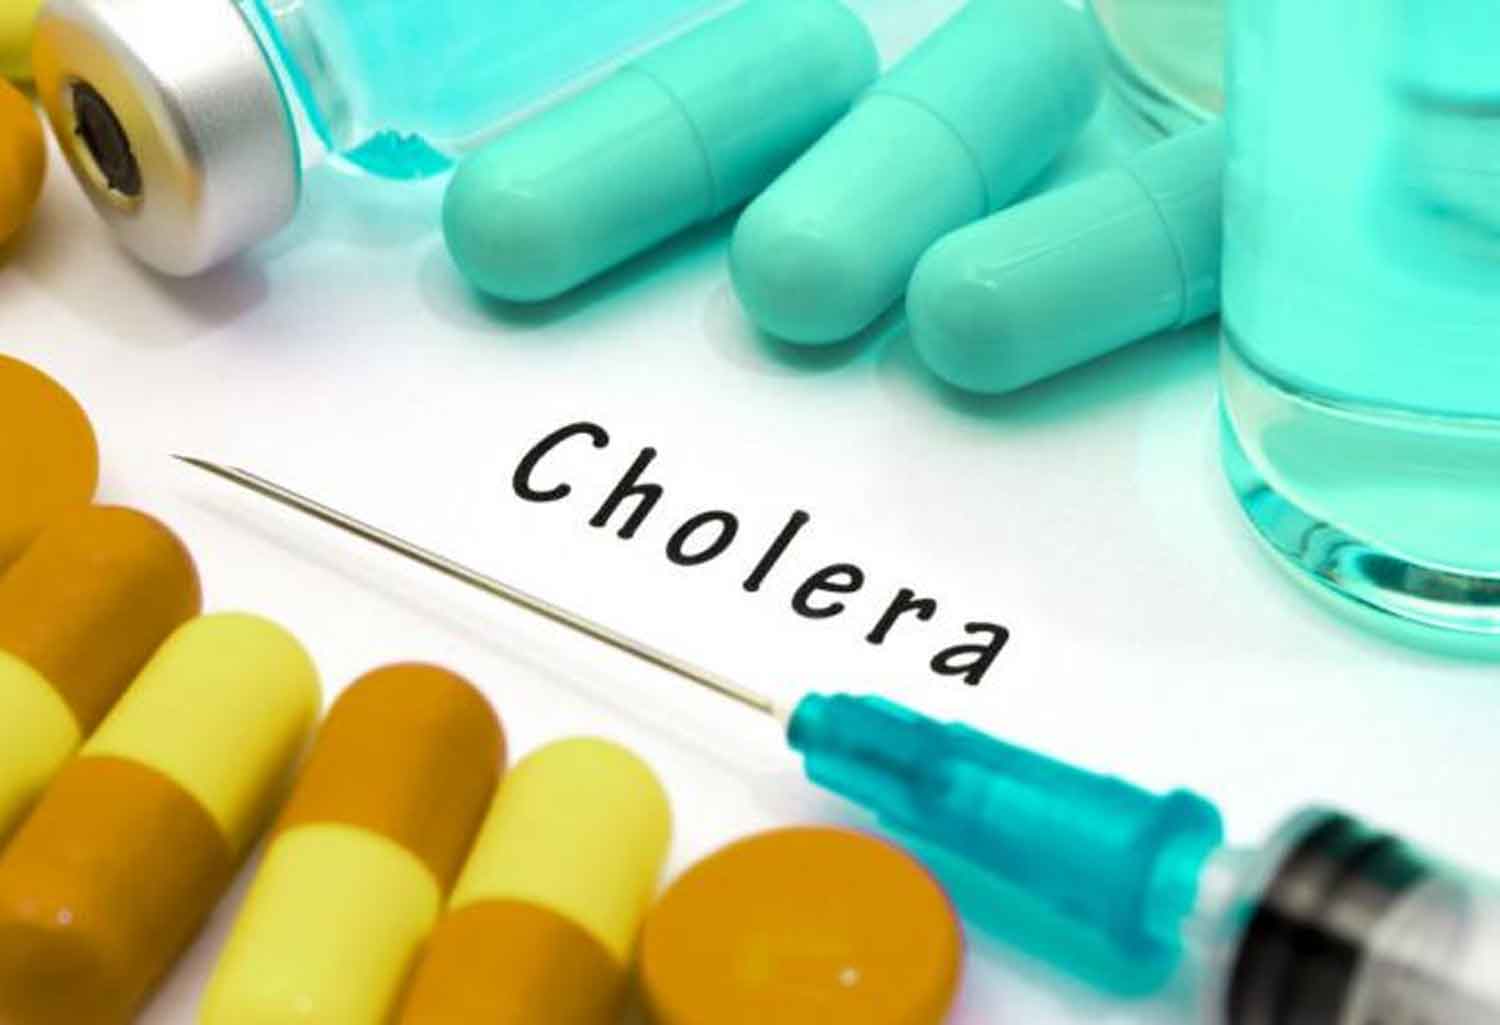 Cholera claims lives of three children in Benue, others hospitalized